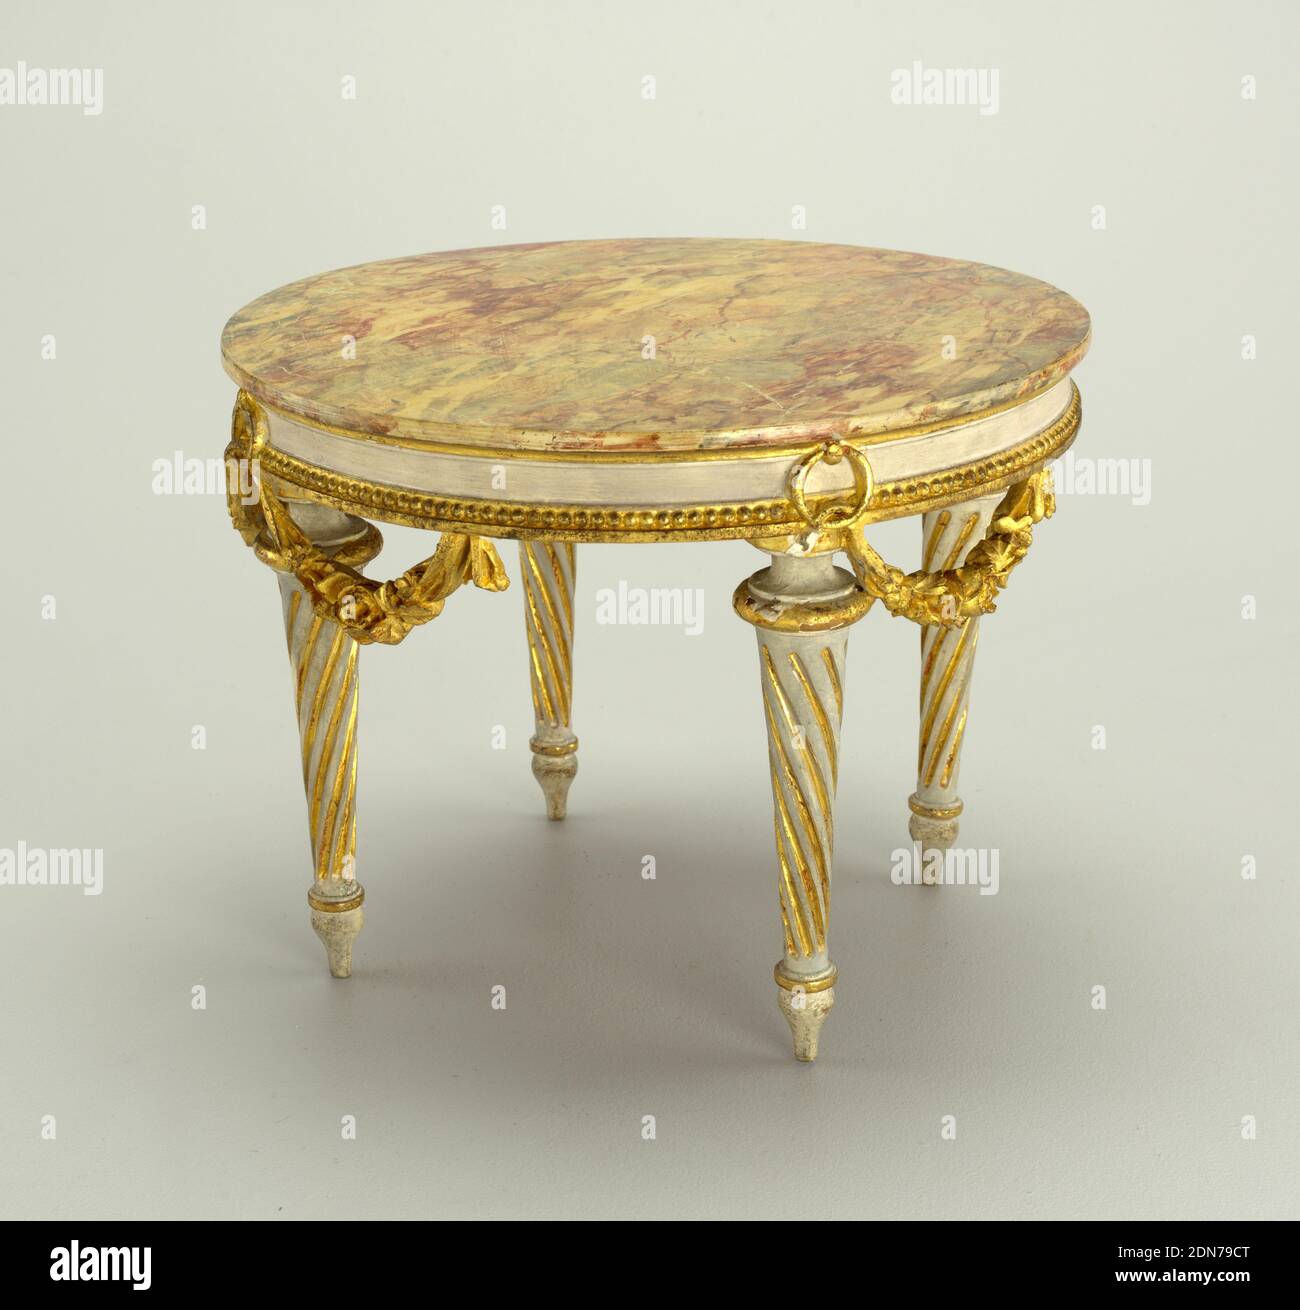 table, wood, carved, painted, gilded, Miniature table made of chestnut with a near circular top marbleized and carved in one piece with frieze rail which has beading on lower edge and free hanging flower garlands suspended by rings. Four tapering, spirally fluted legs terminating in baluster feet. Painted grayish white and gilt in parts., France, late 18th century, miniatures, Decorative Arts, Miniature, Miniature Stock Photo